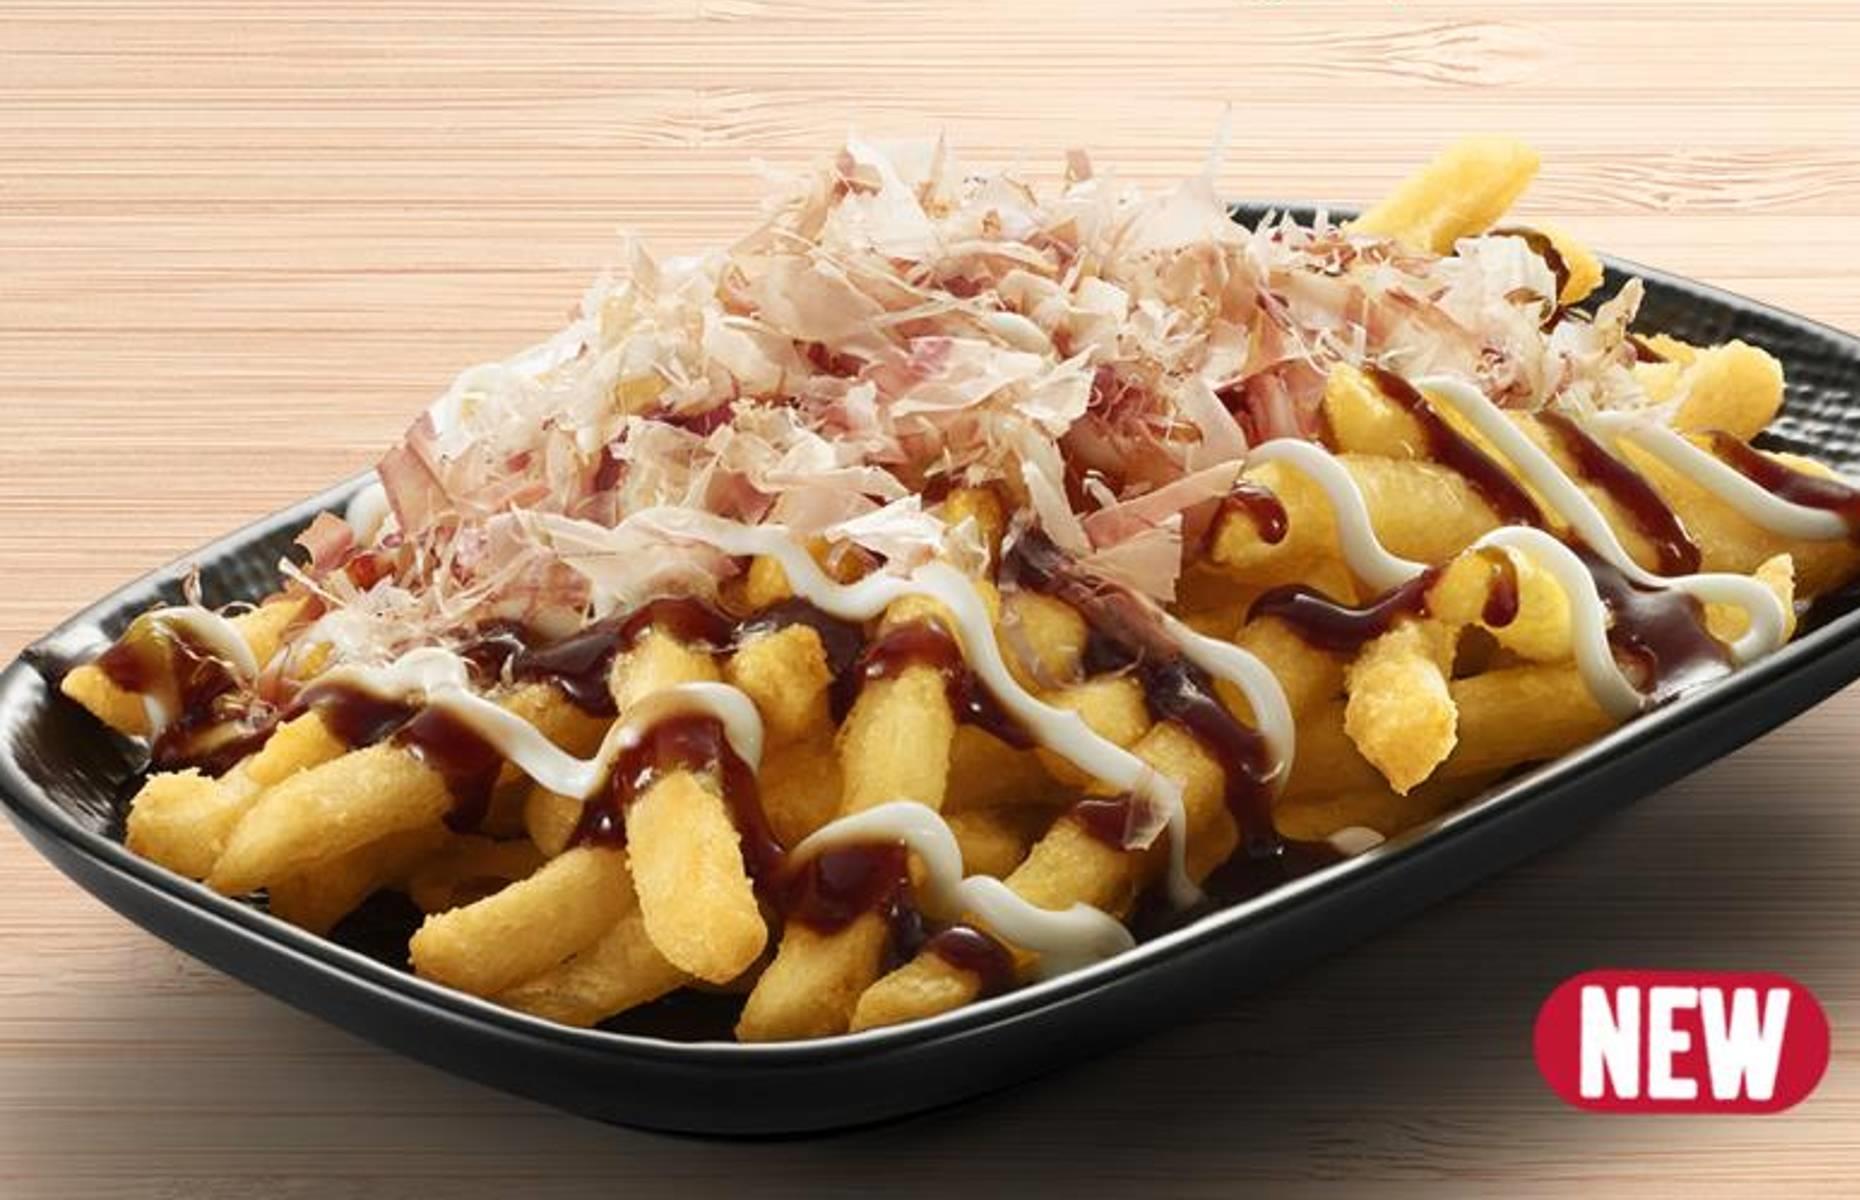 <p>Taking inspiration from Japan, KFC Singapore launched two new items in 2018: the Tori Katsu Burger and Bonito Fries. You may have tried chicken katsu, but more surprising were the Bonito Fries. This take on loaded fries was artistically drizzled with katsu sauce and mayo, then topped with a heap of salty bonito flakes, made with dried bonito, a fish from the mackerel and tuna family.</p>